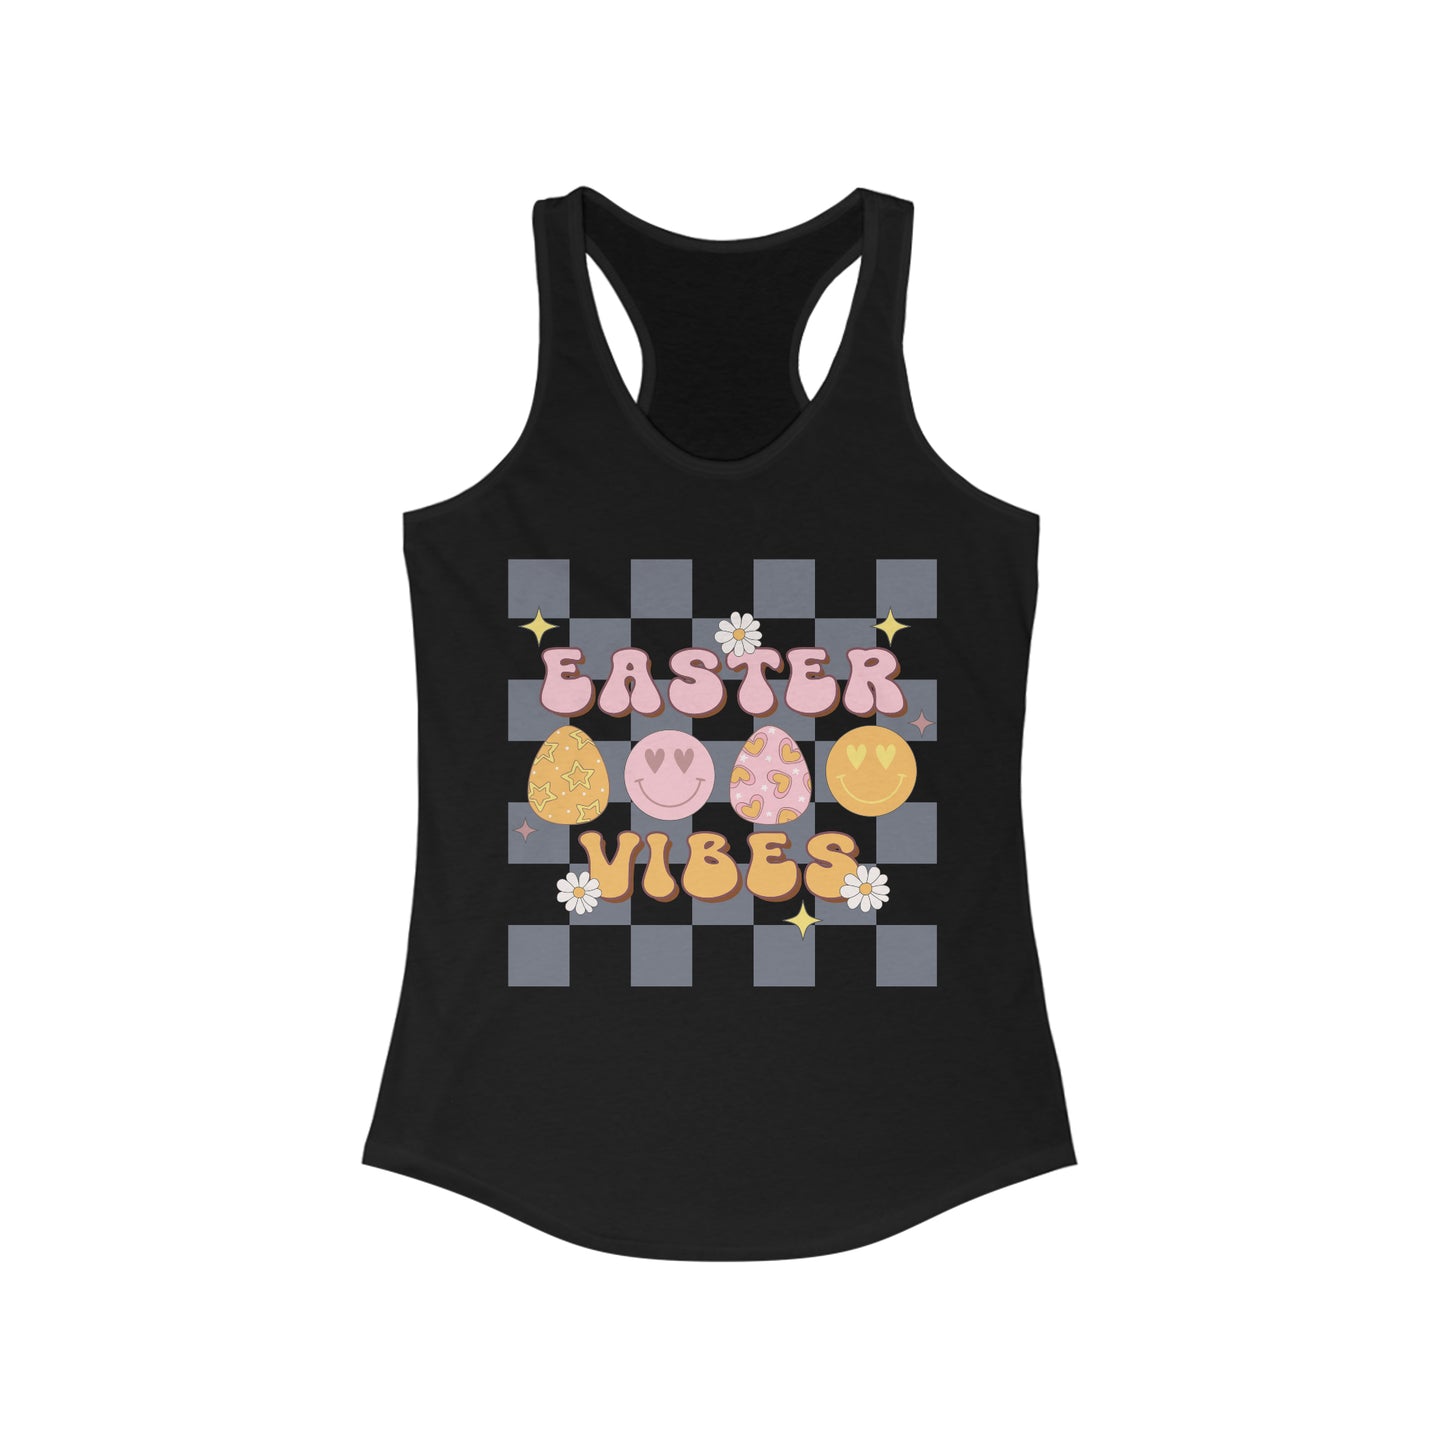 Easter Vibes Pink - Women's Ideal Racerback Tank